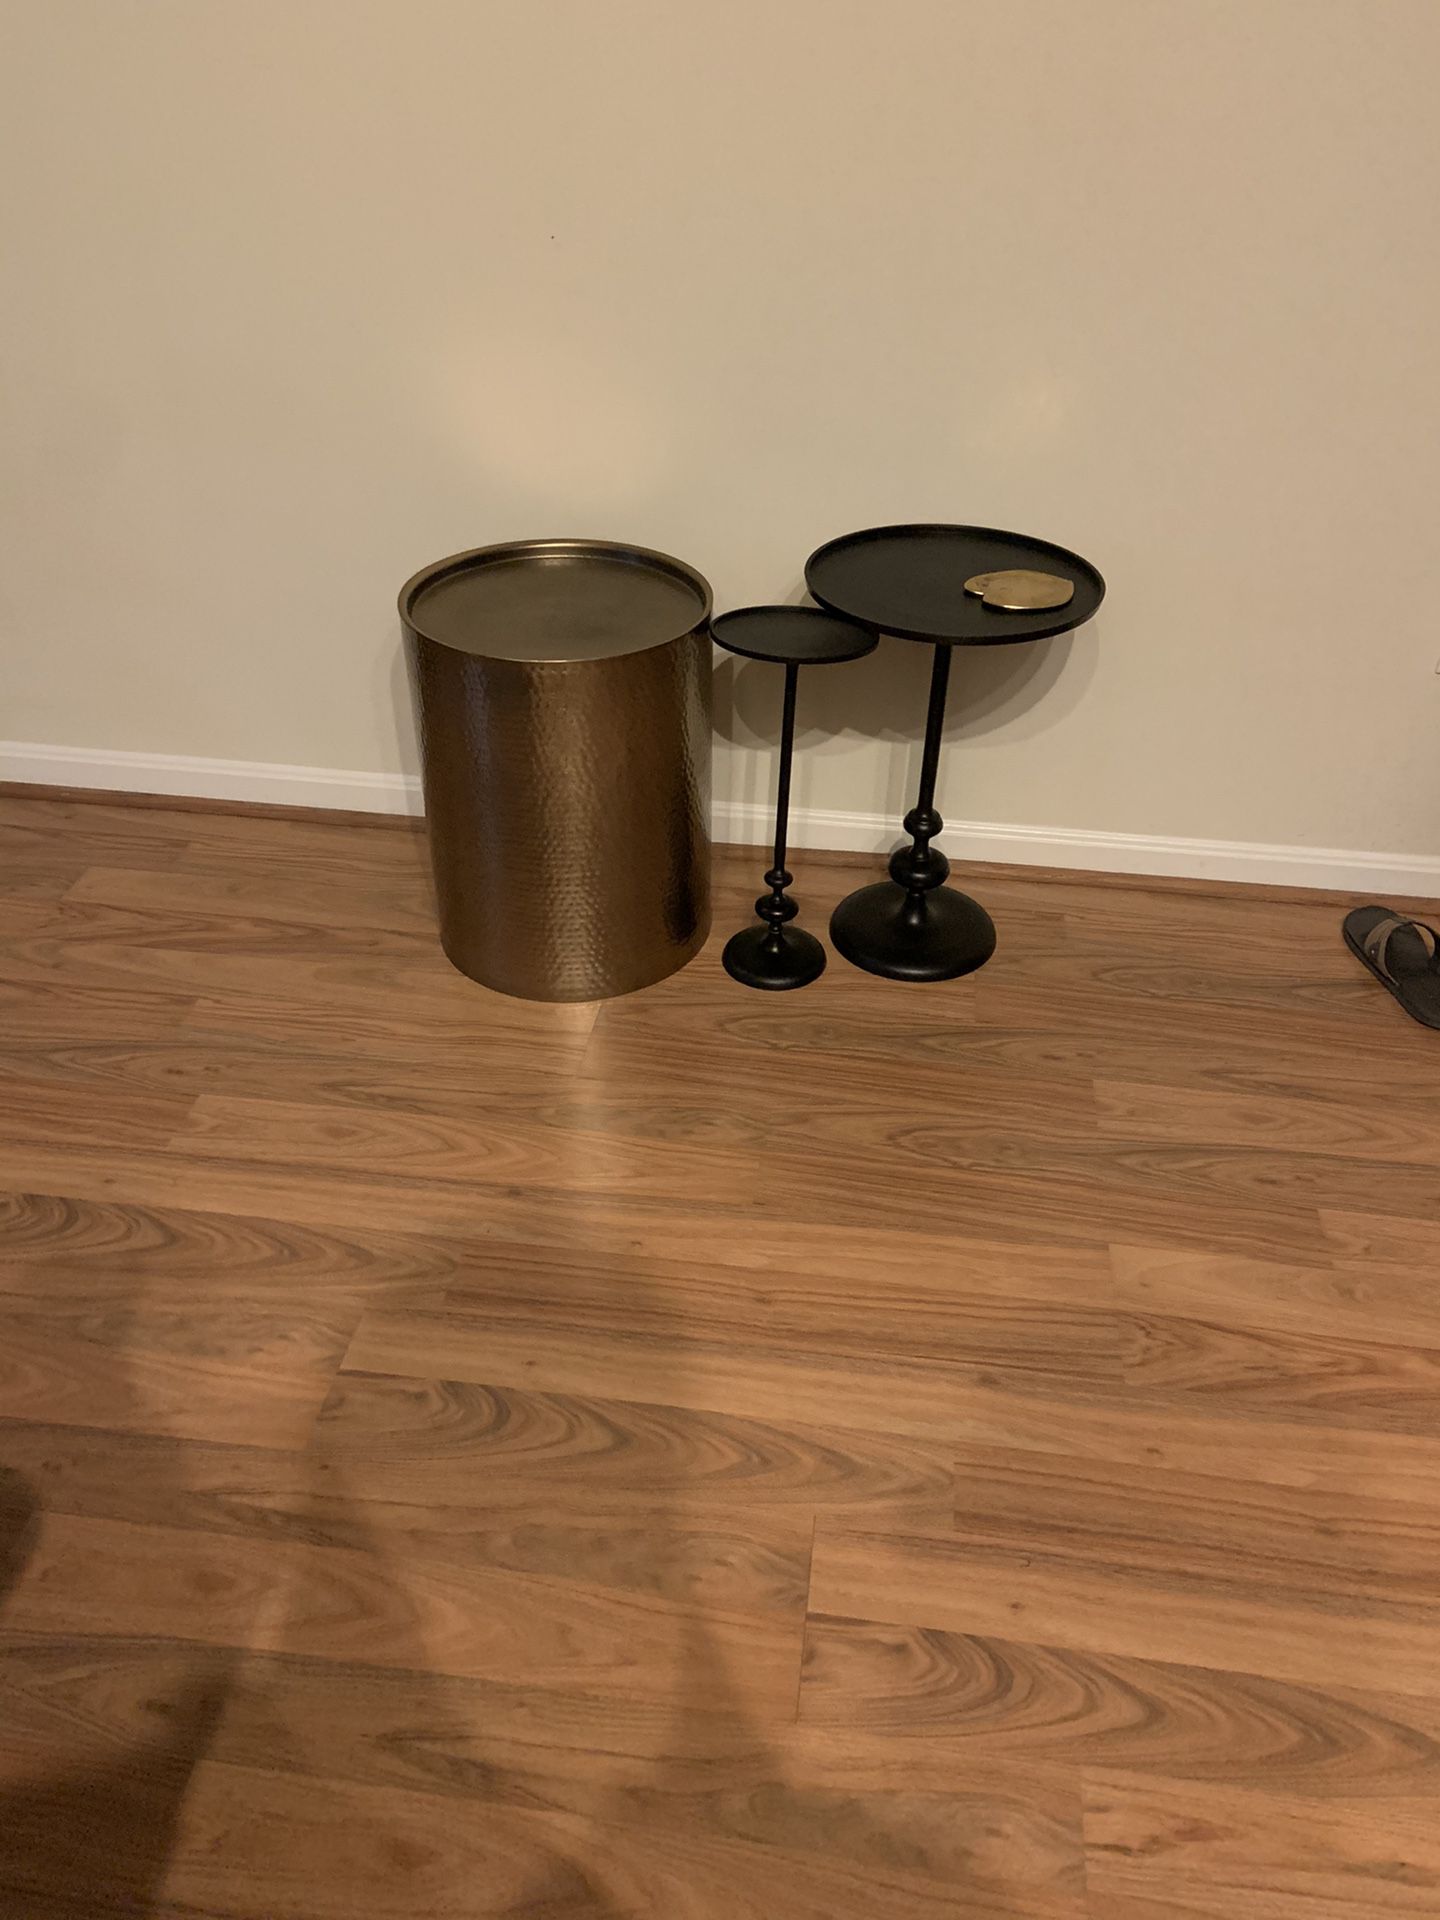 Set of three tables/stands from target